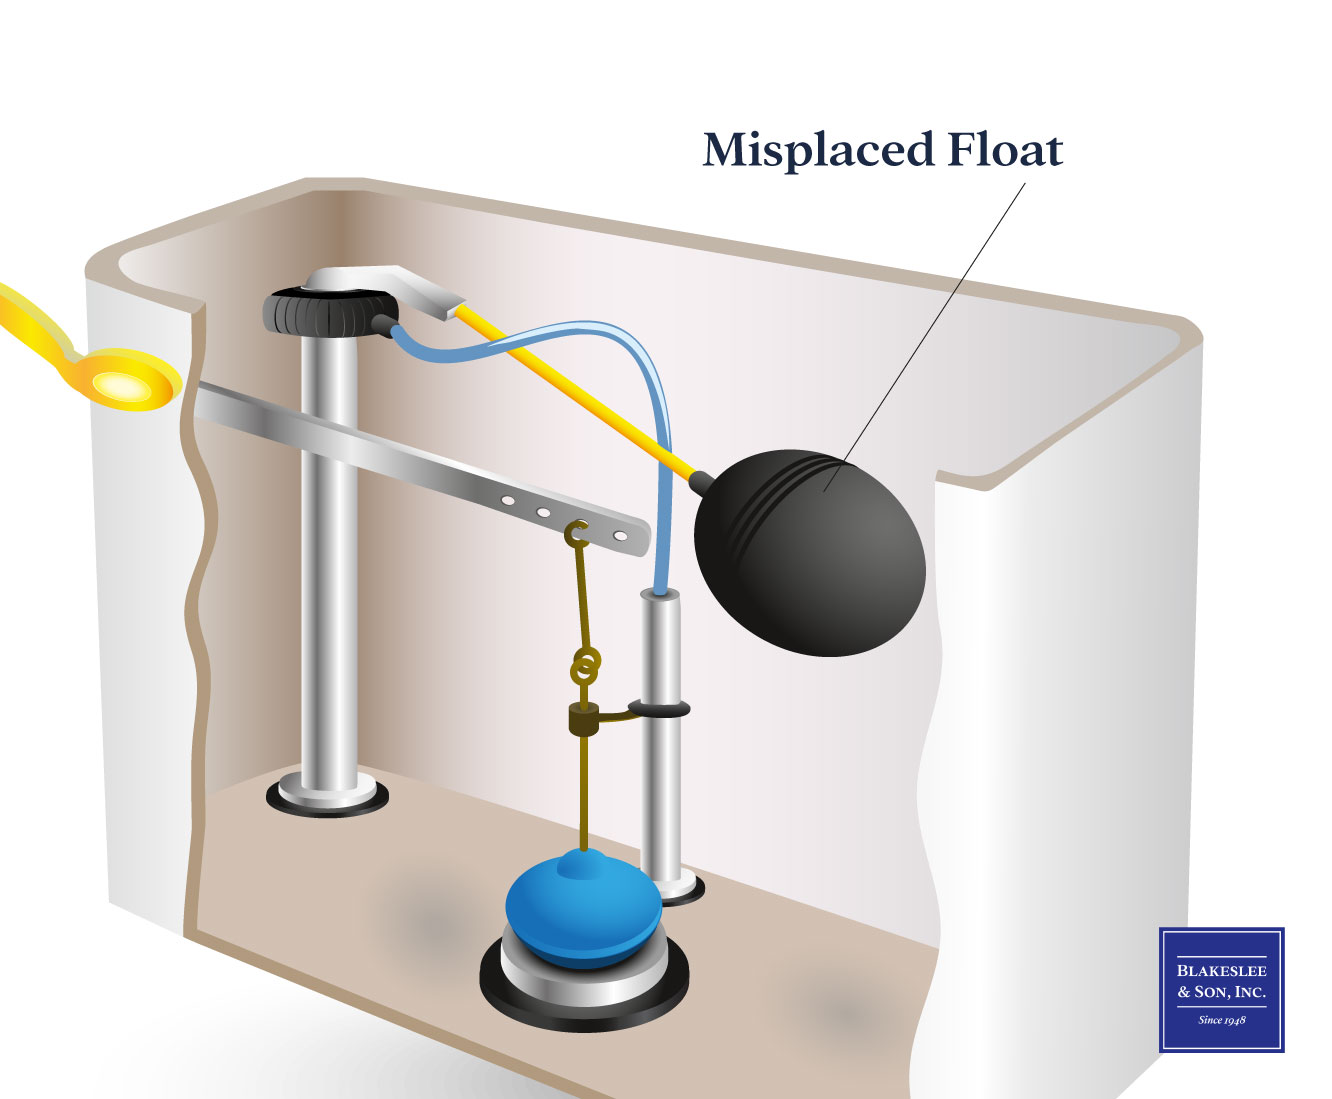 Diagram showing a misplaced float and its location inside the toilet tank.